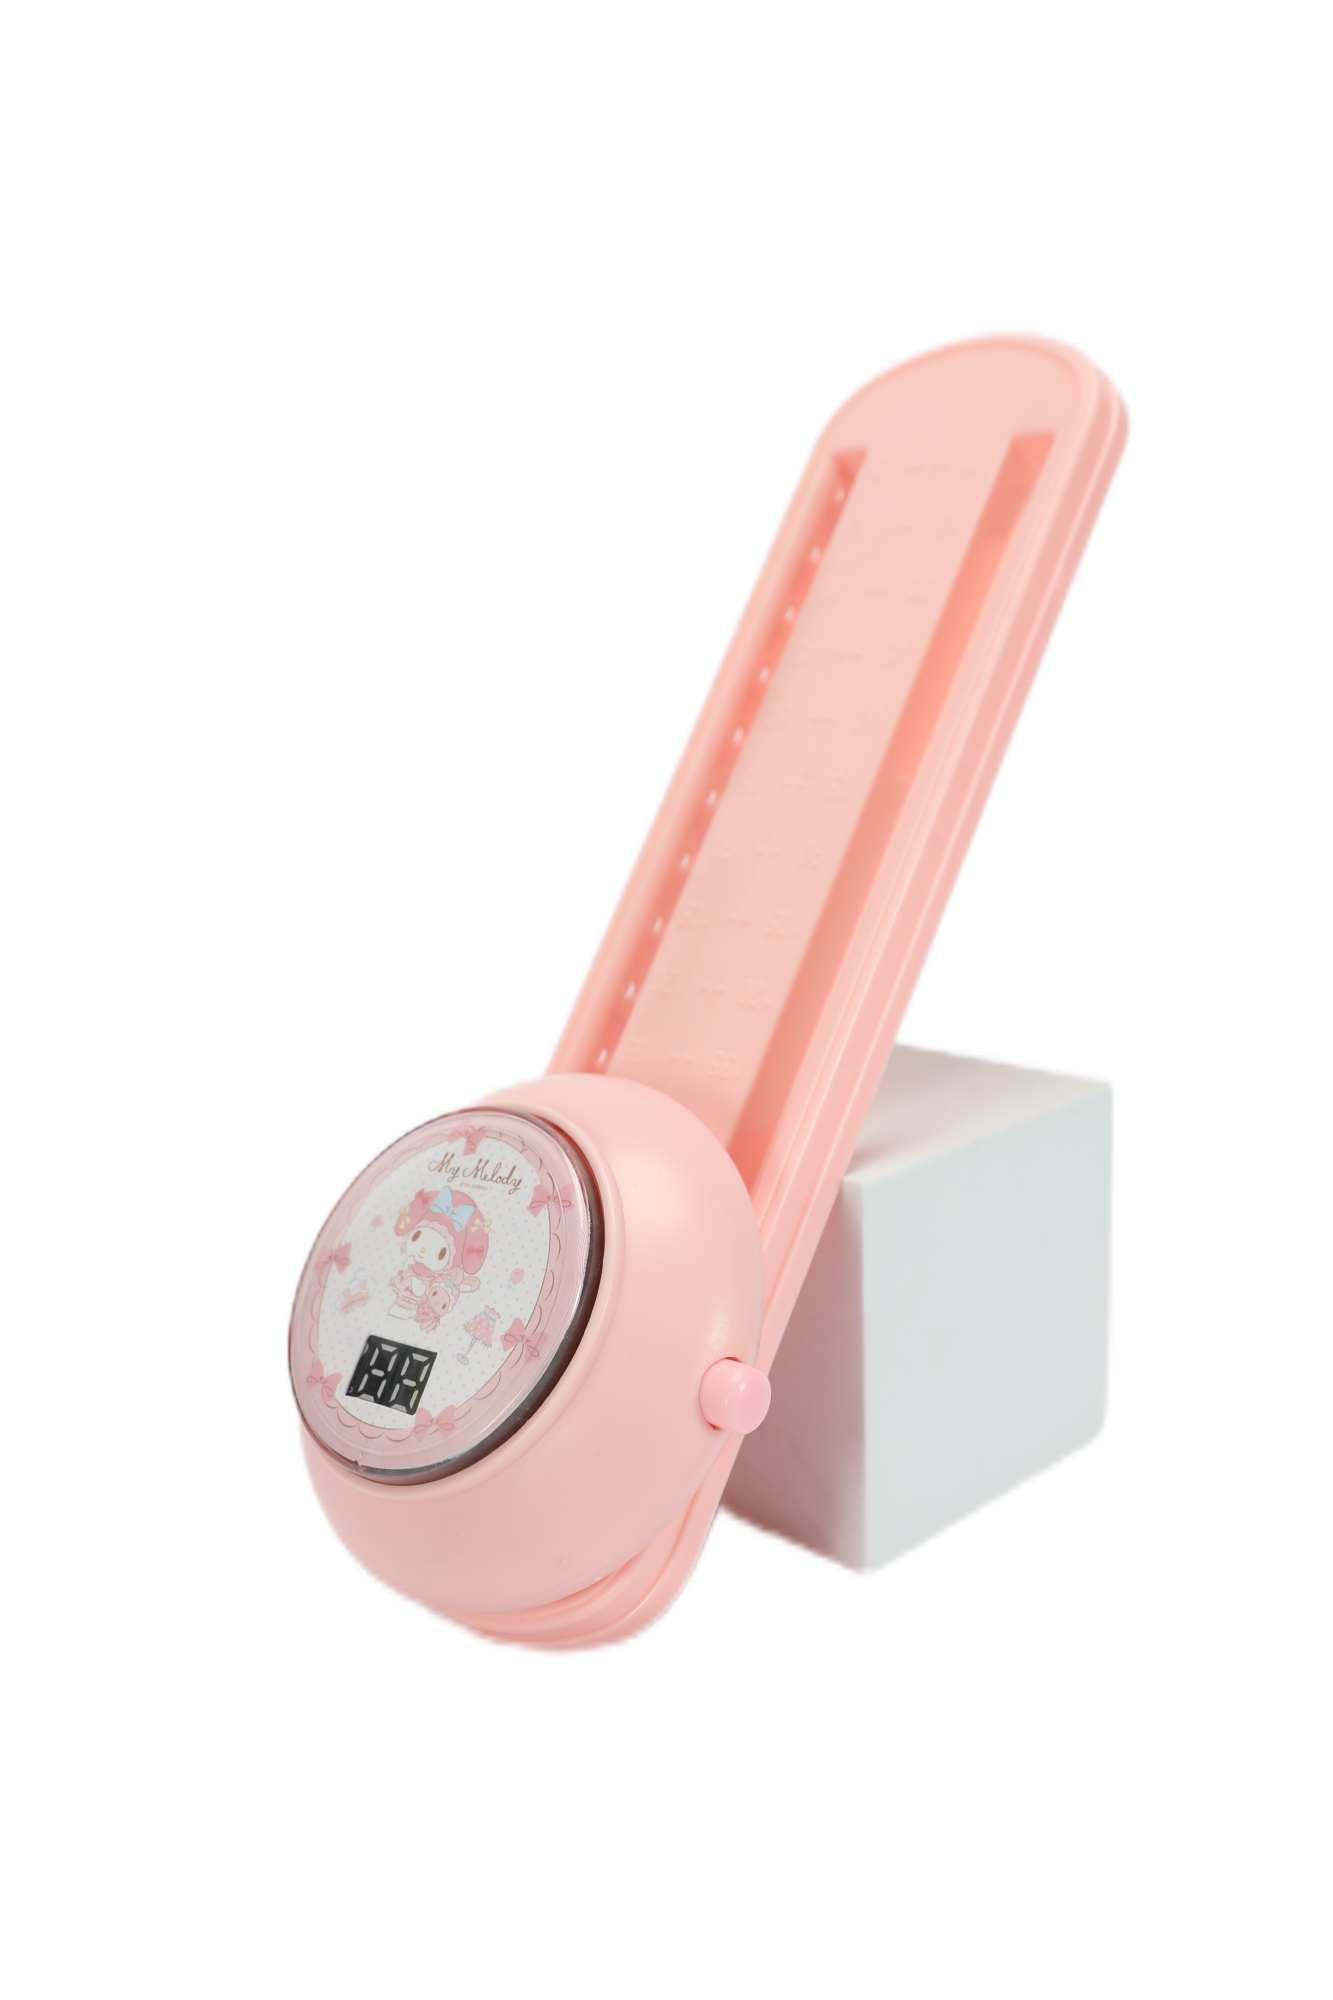 Sanrio Melody Children's Height Touch Device （Adjustable Height）